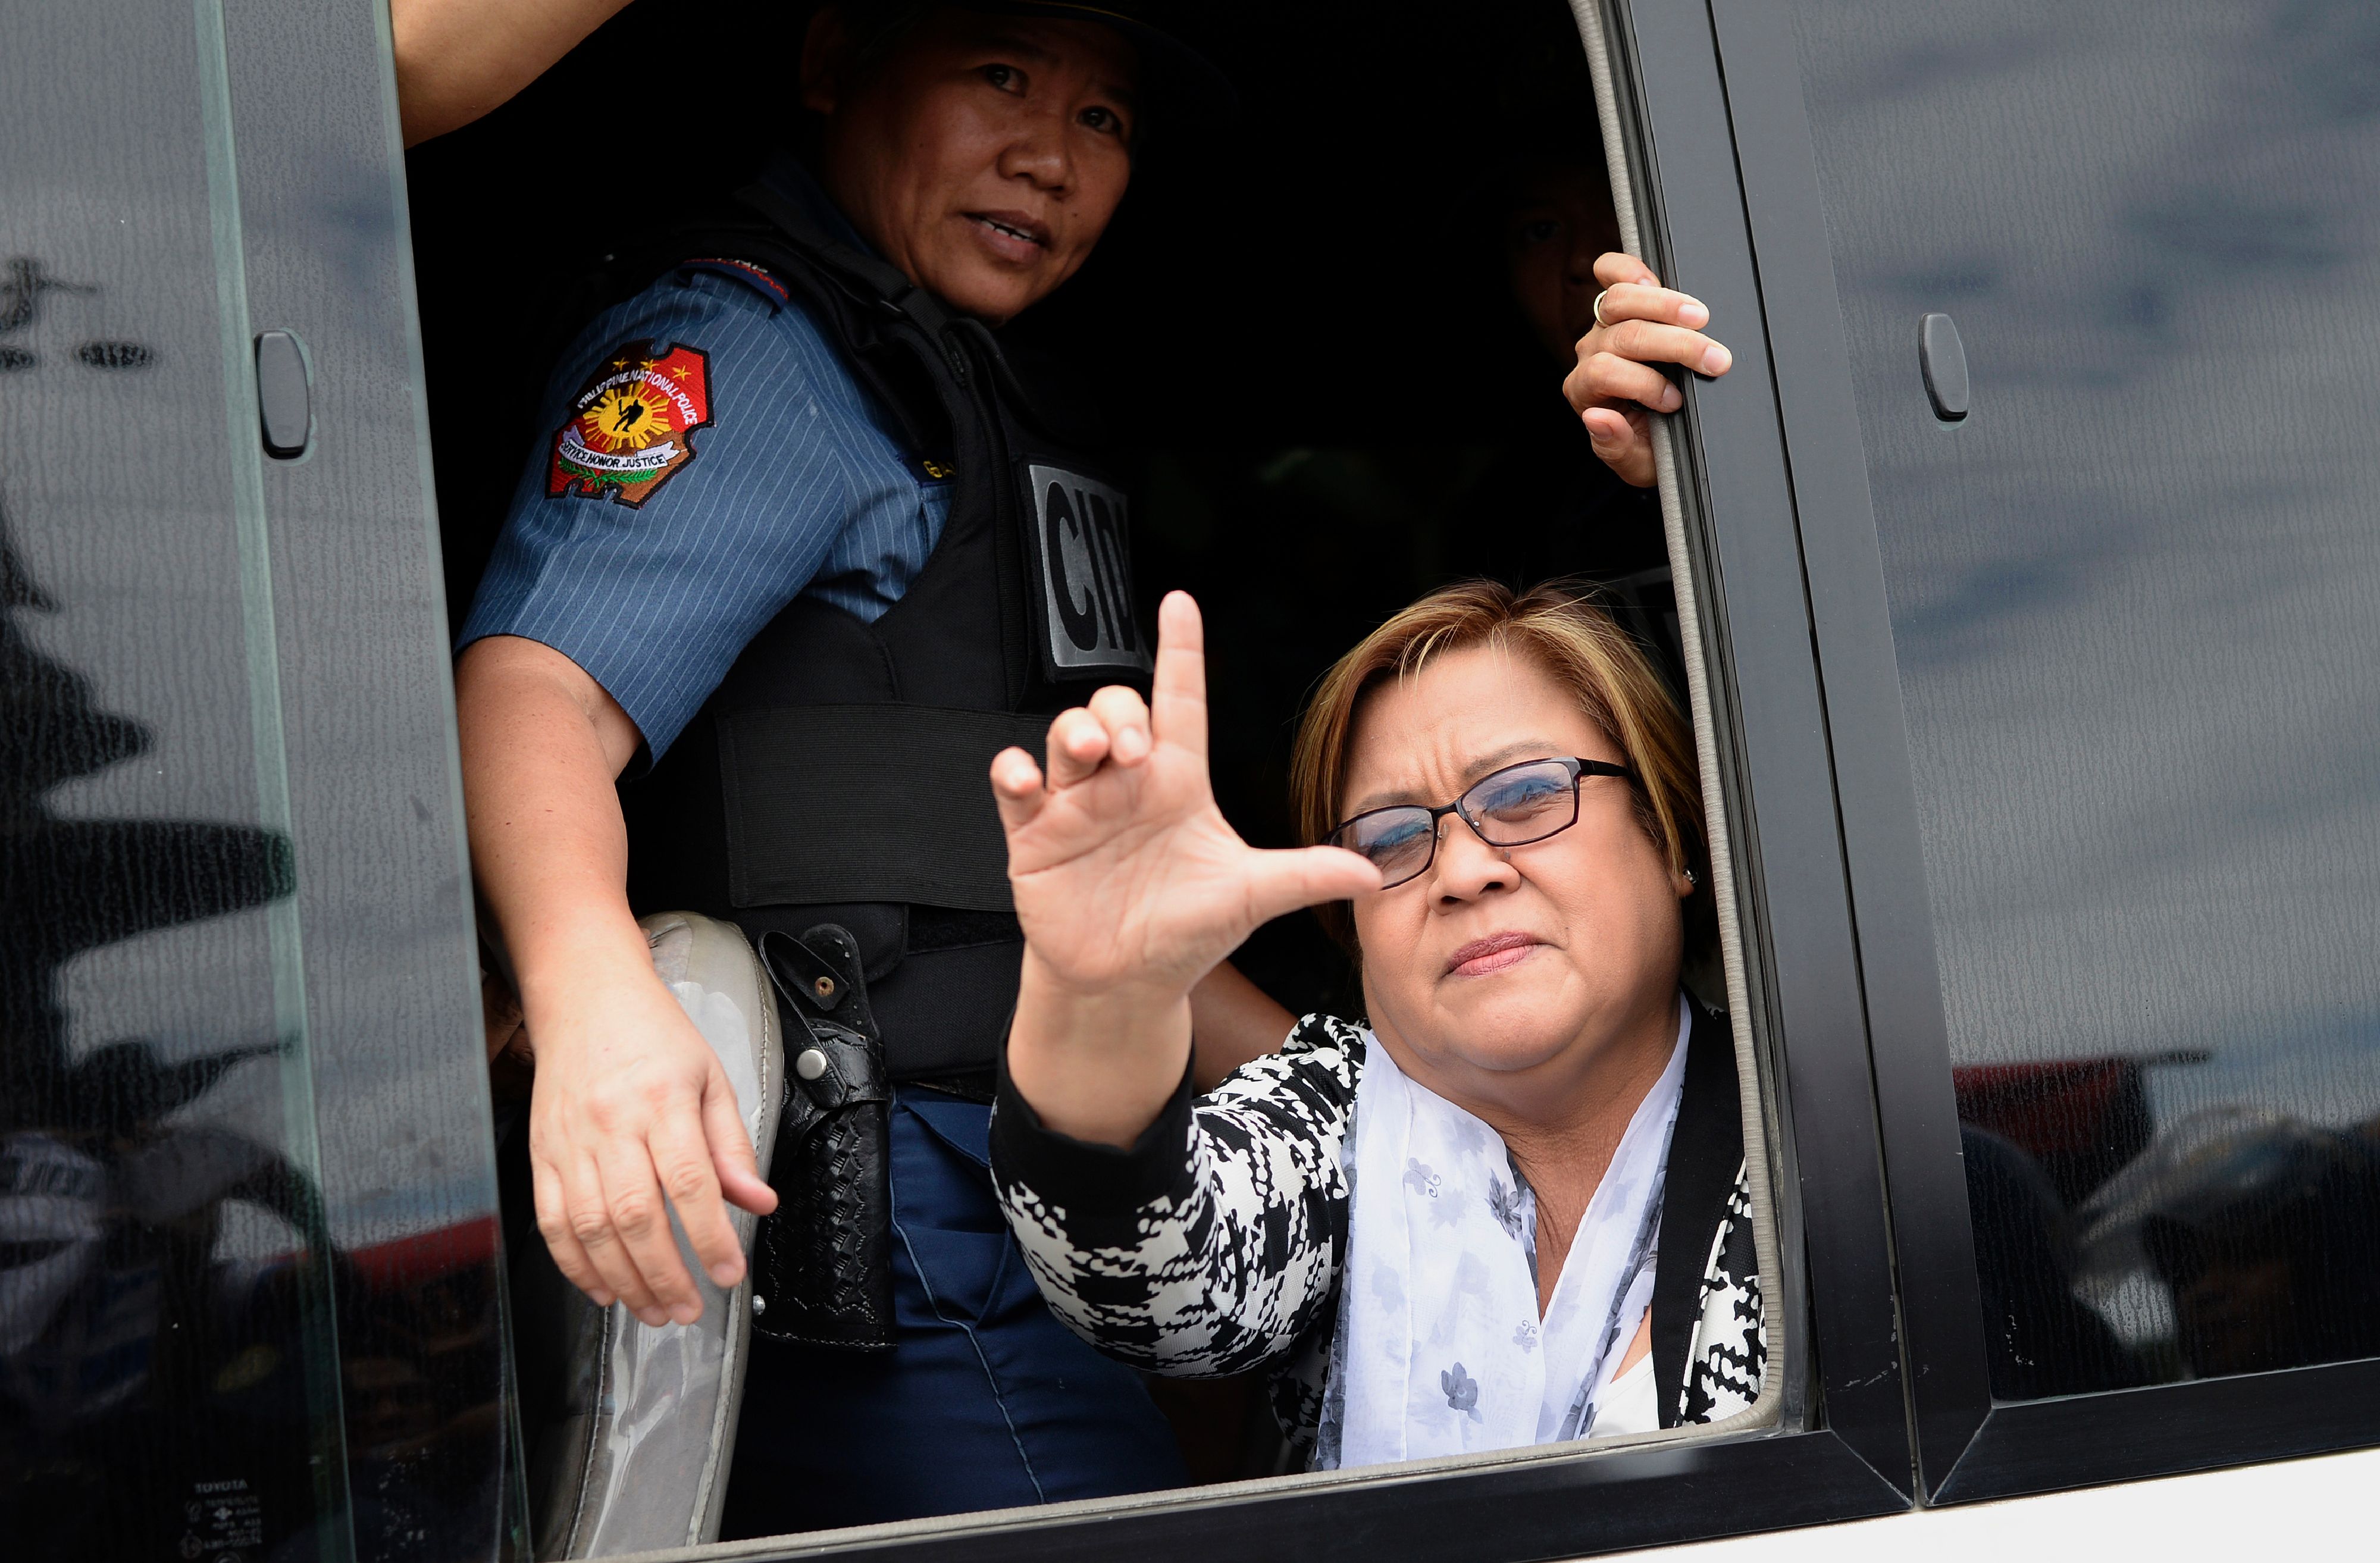 Philippine Senator Leila De Lima waves to her supporters after appearing at a court in Muntinlupa City, Manila on February 24, 2017. (Noel Celis—AFP/Getty Images)